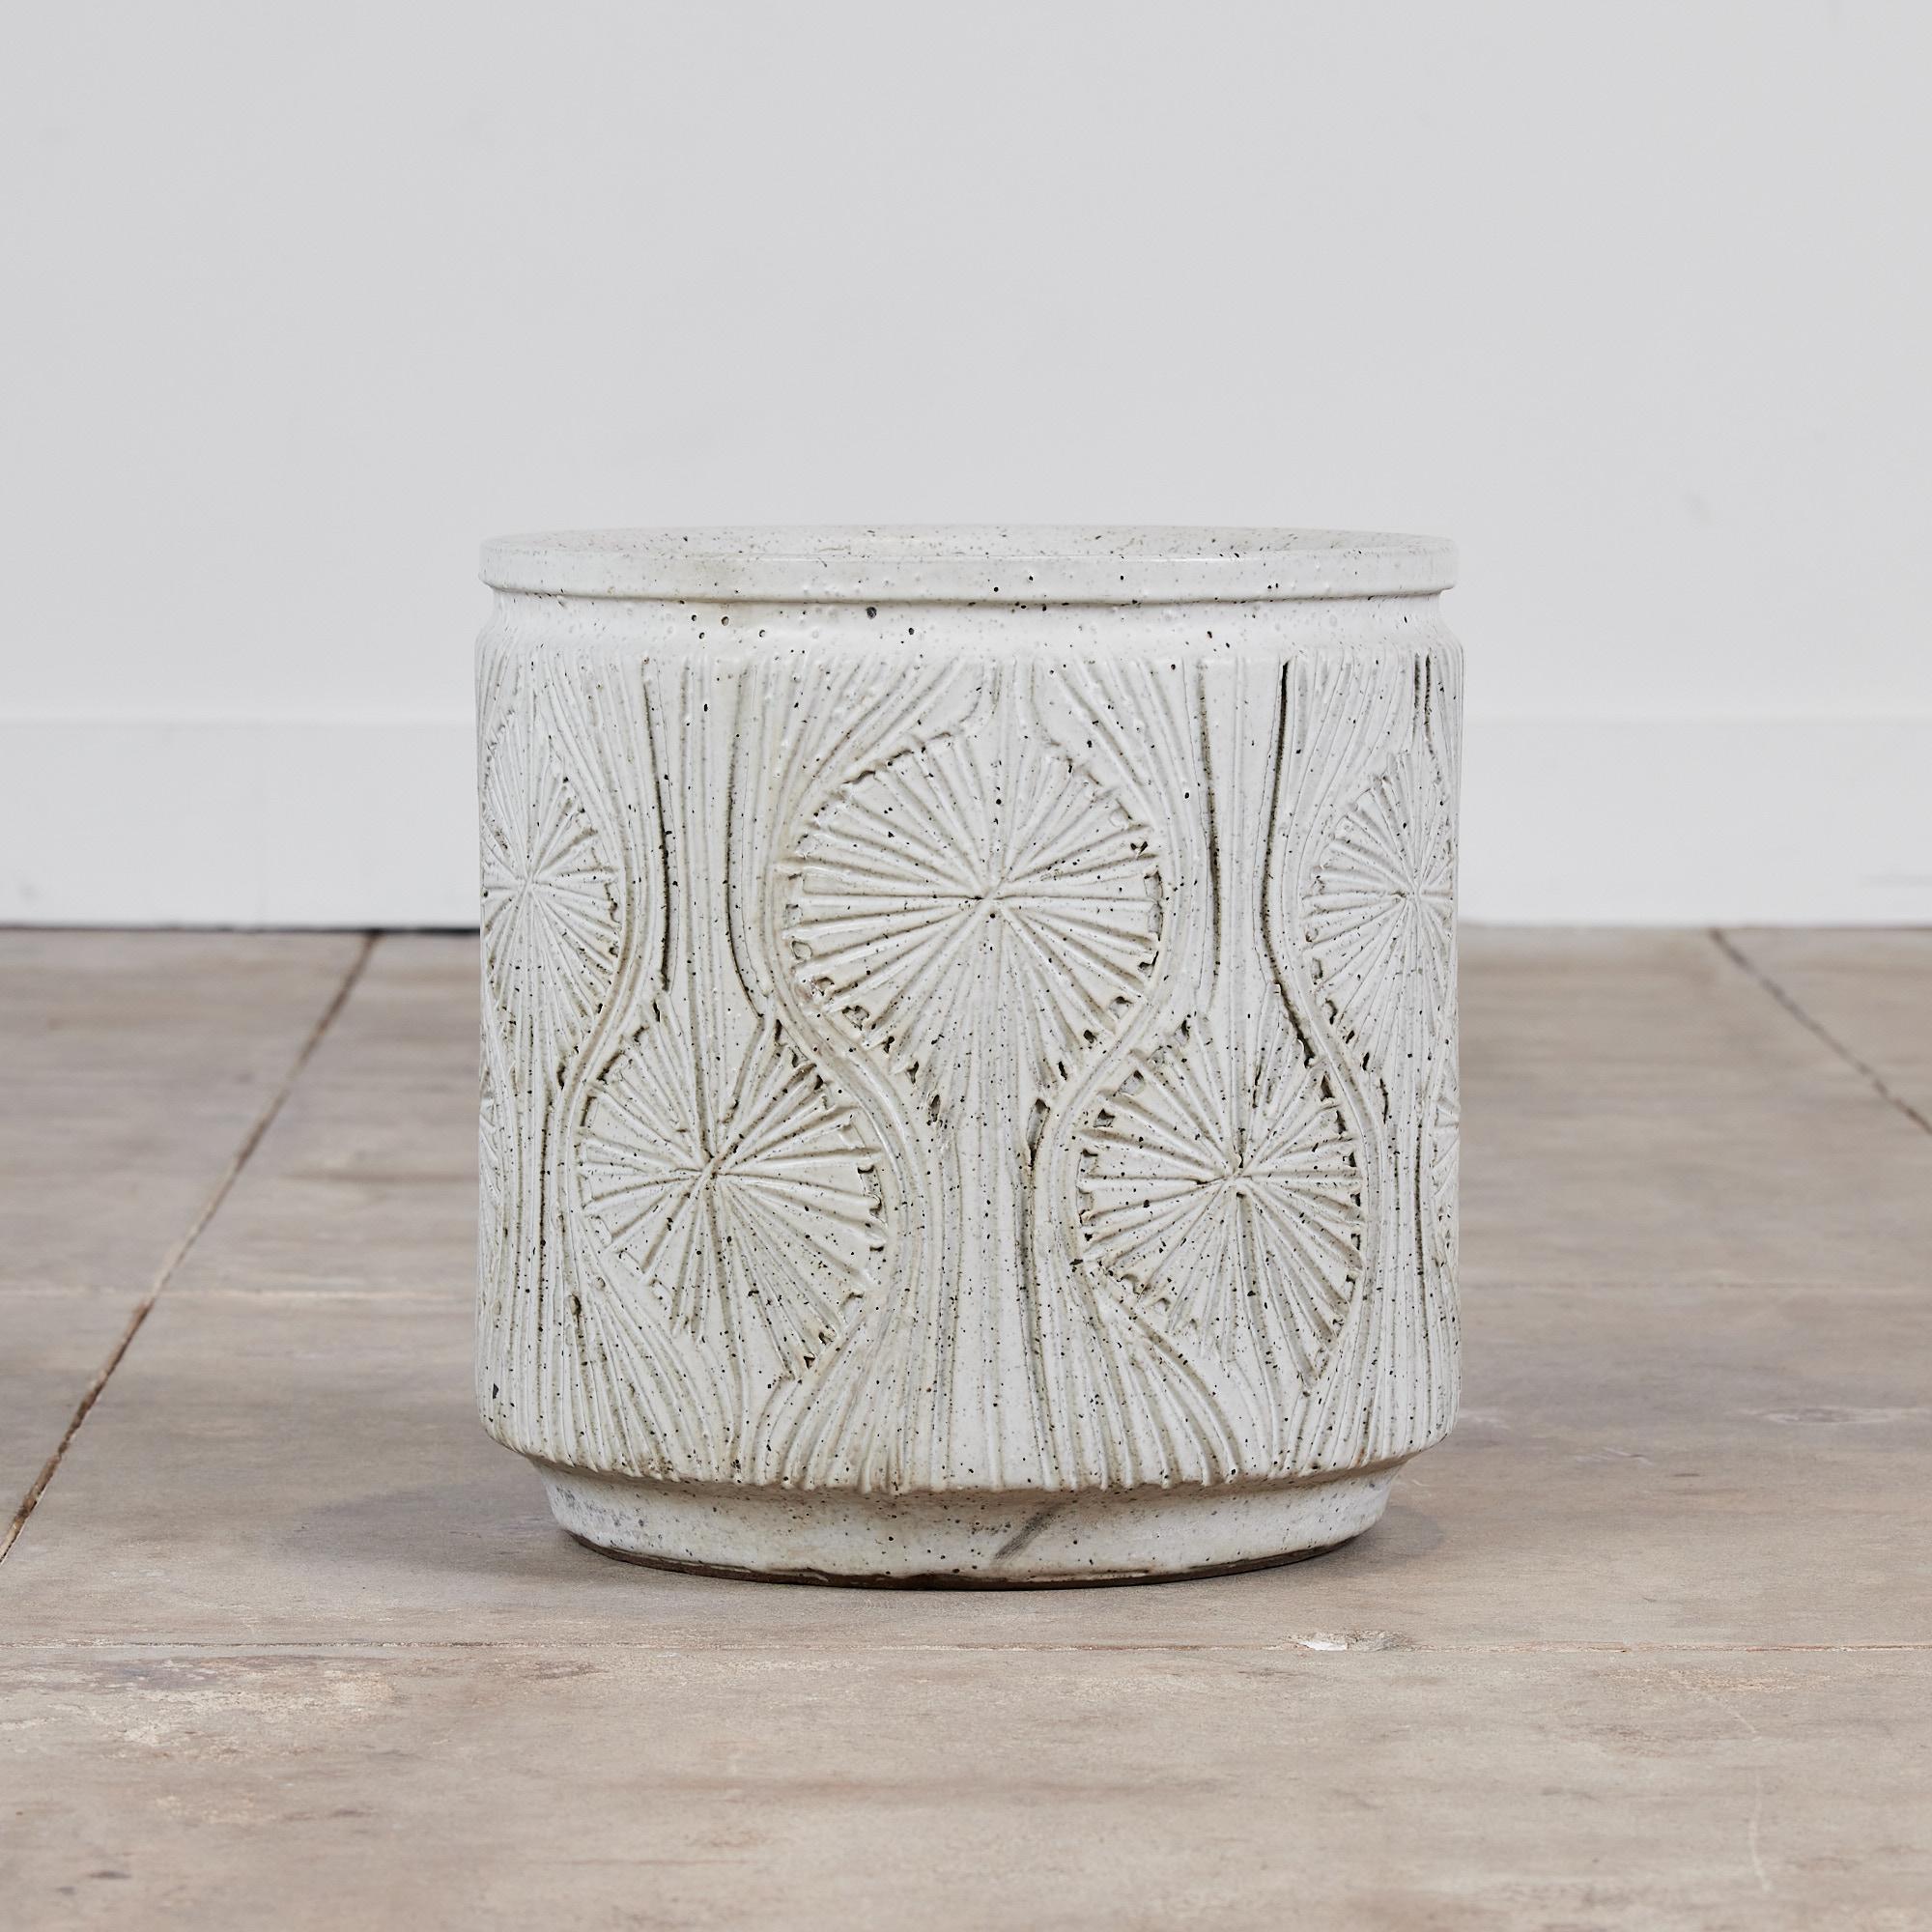 A cylindrical planter from Earthgender, David Cressey and Robert Maxwell’s early 1970s project. This 14.75” diameter example is incised in the “Teardrop Sunburst” design with interlocking gestural curves separating a pattern of lines radiating from